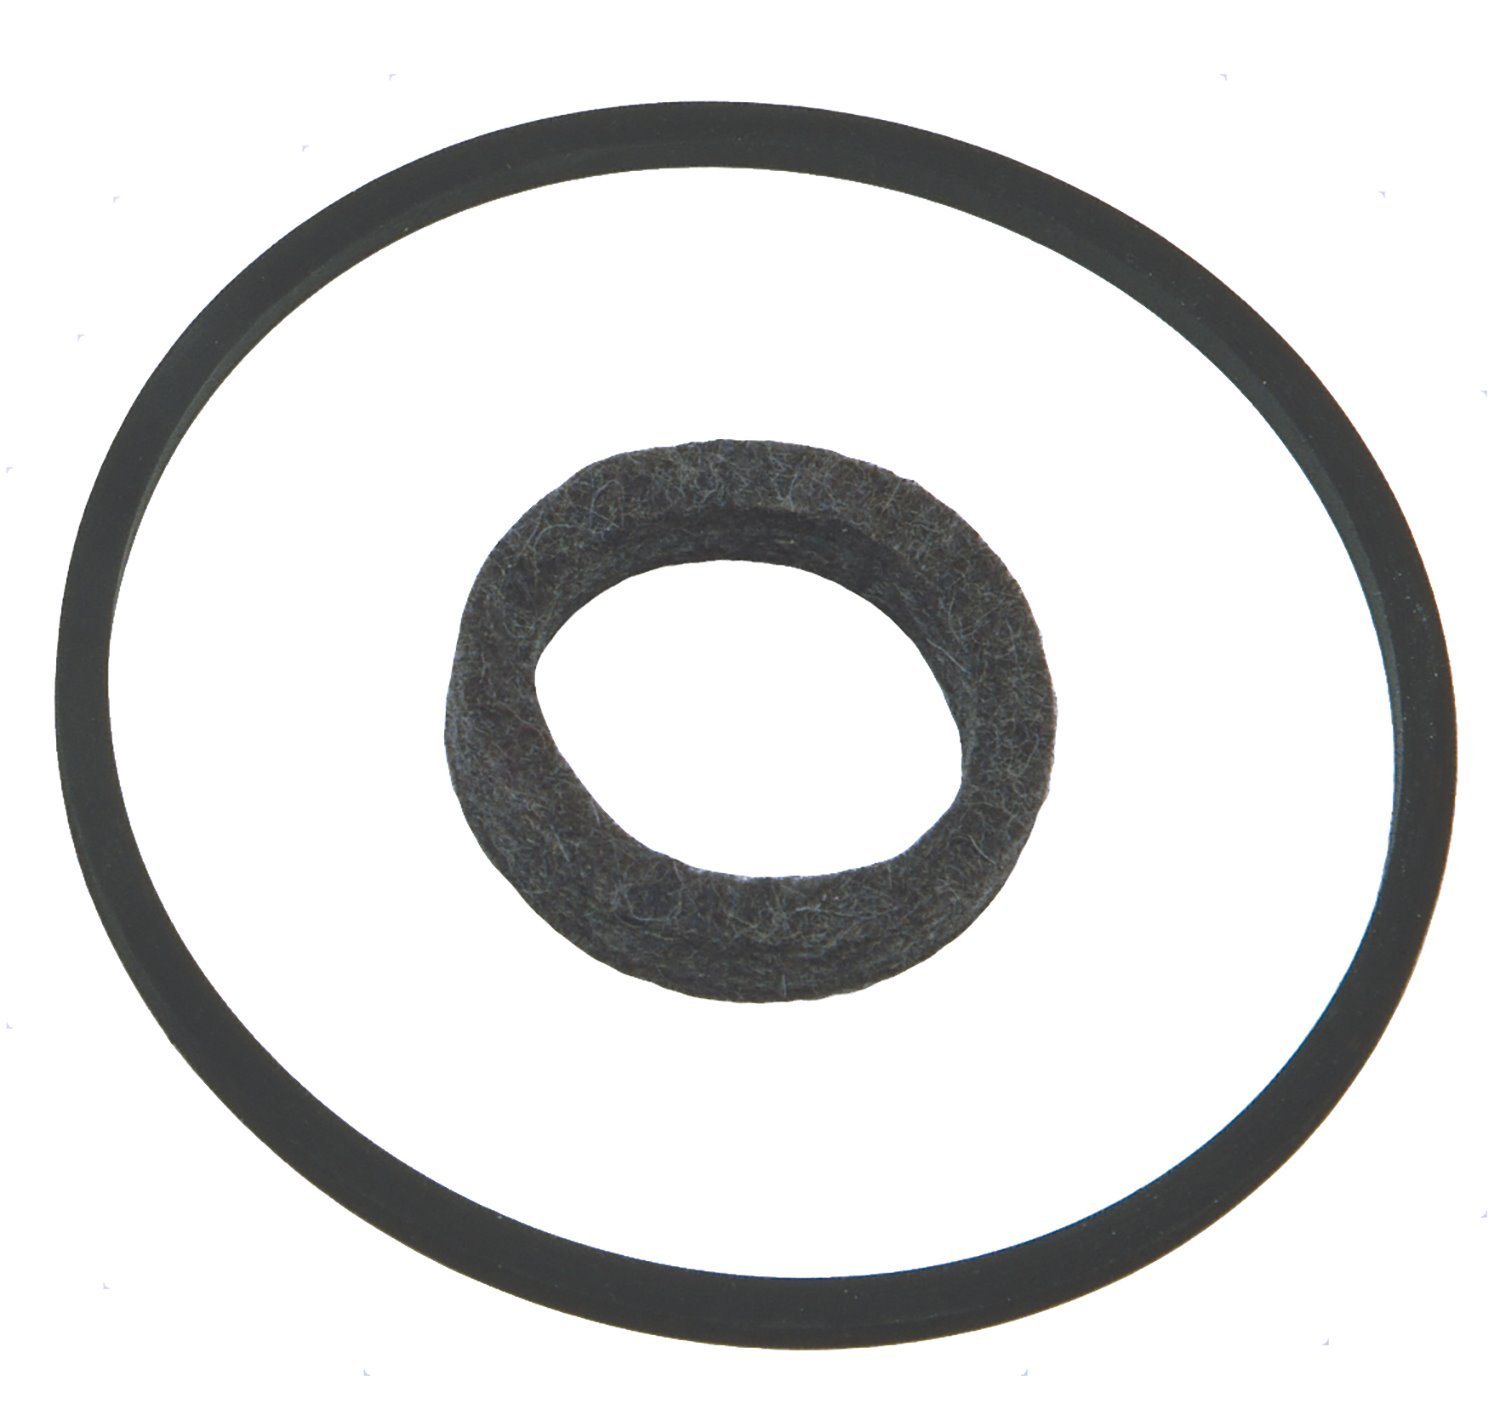 Replacement O-Ring Gasket For 259-15760 and 259-15761